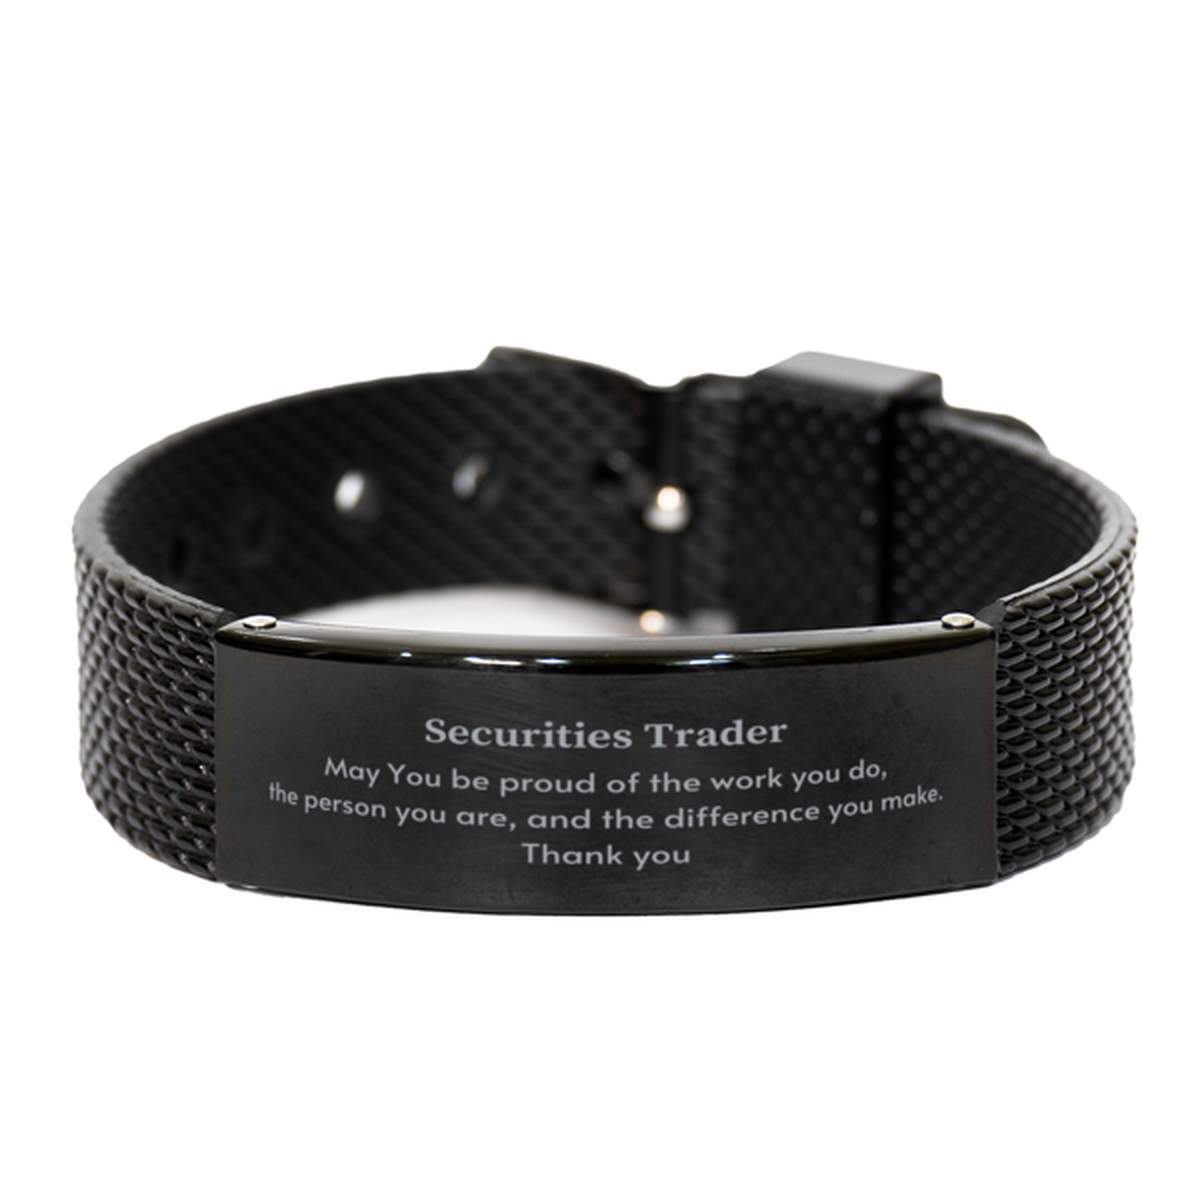 Heartwarming Black Shark Mesh Bracelet Retirement Coworkers Gifts for Securities Trader, Securities Trader May You be proud of the work you do, the person you are Gifts for Boss Men Women Friends